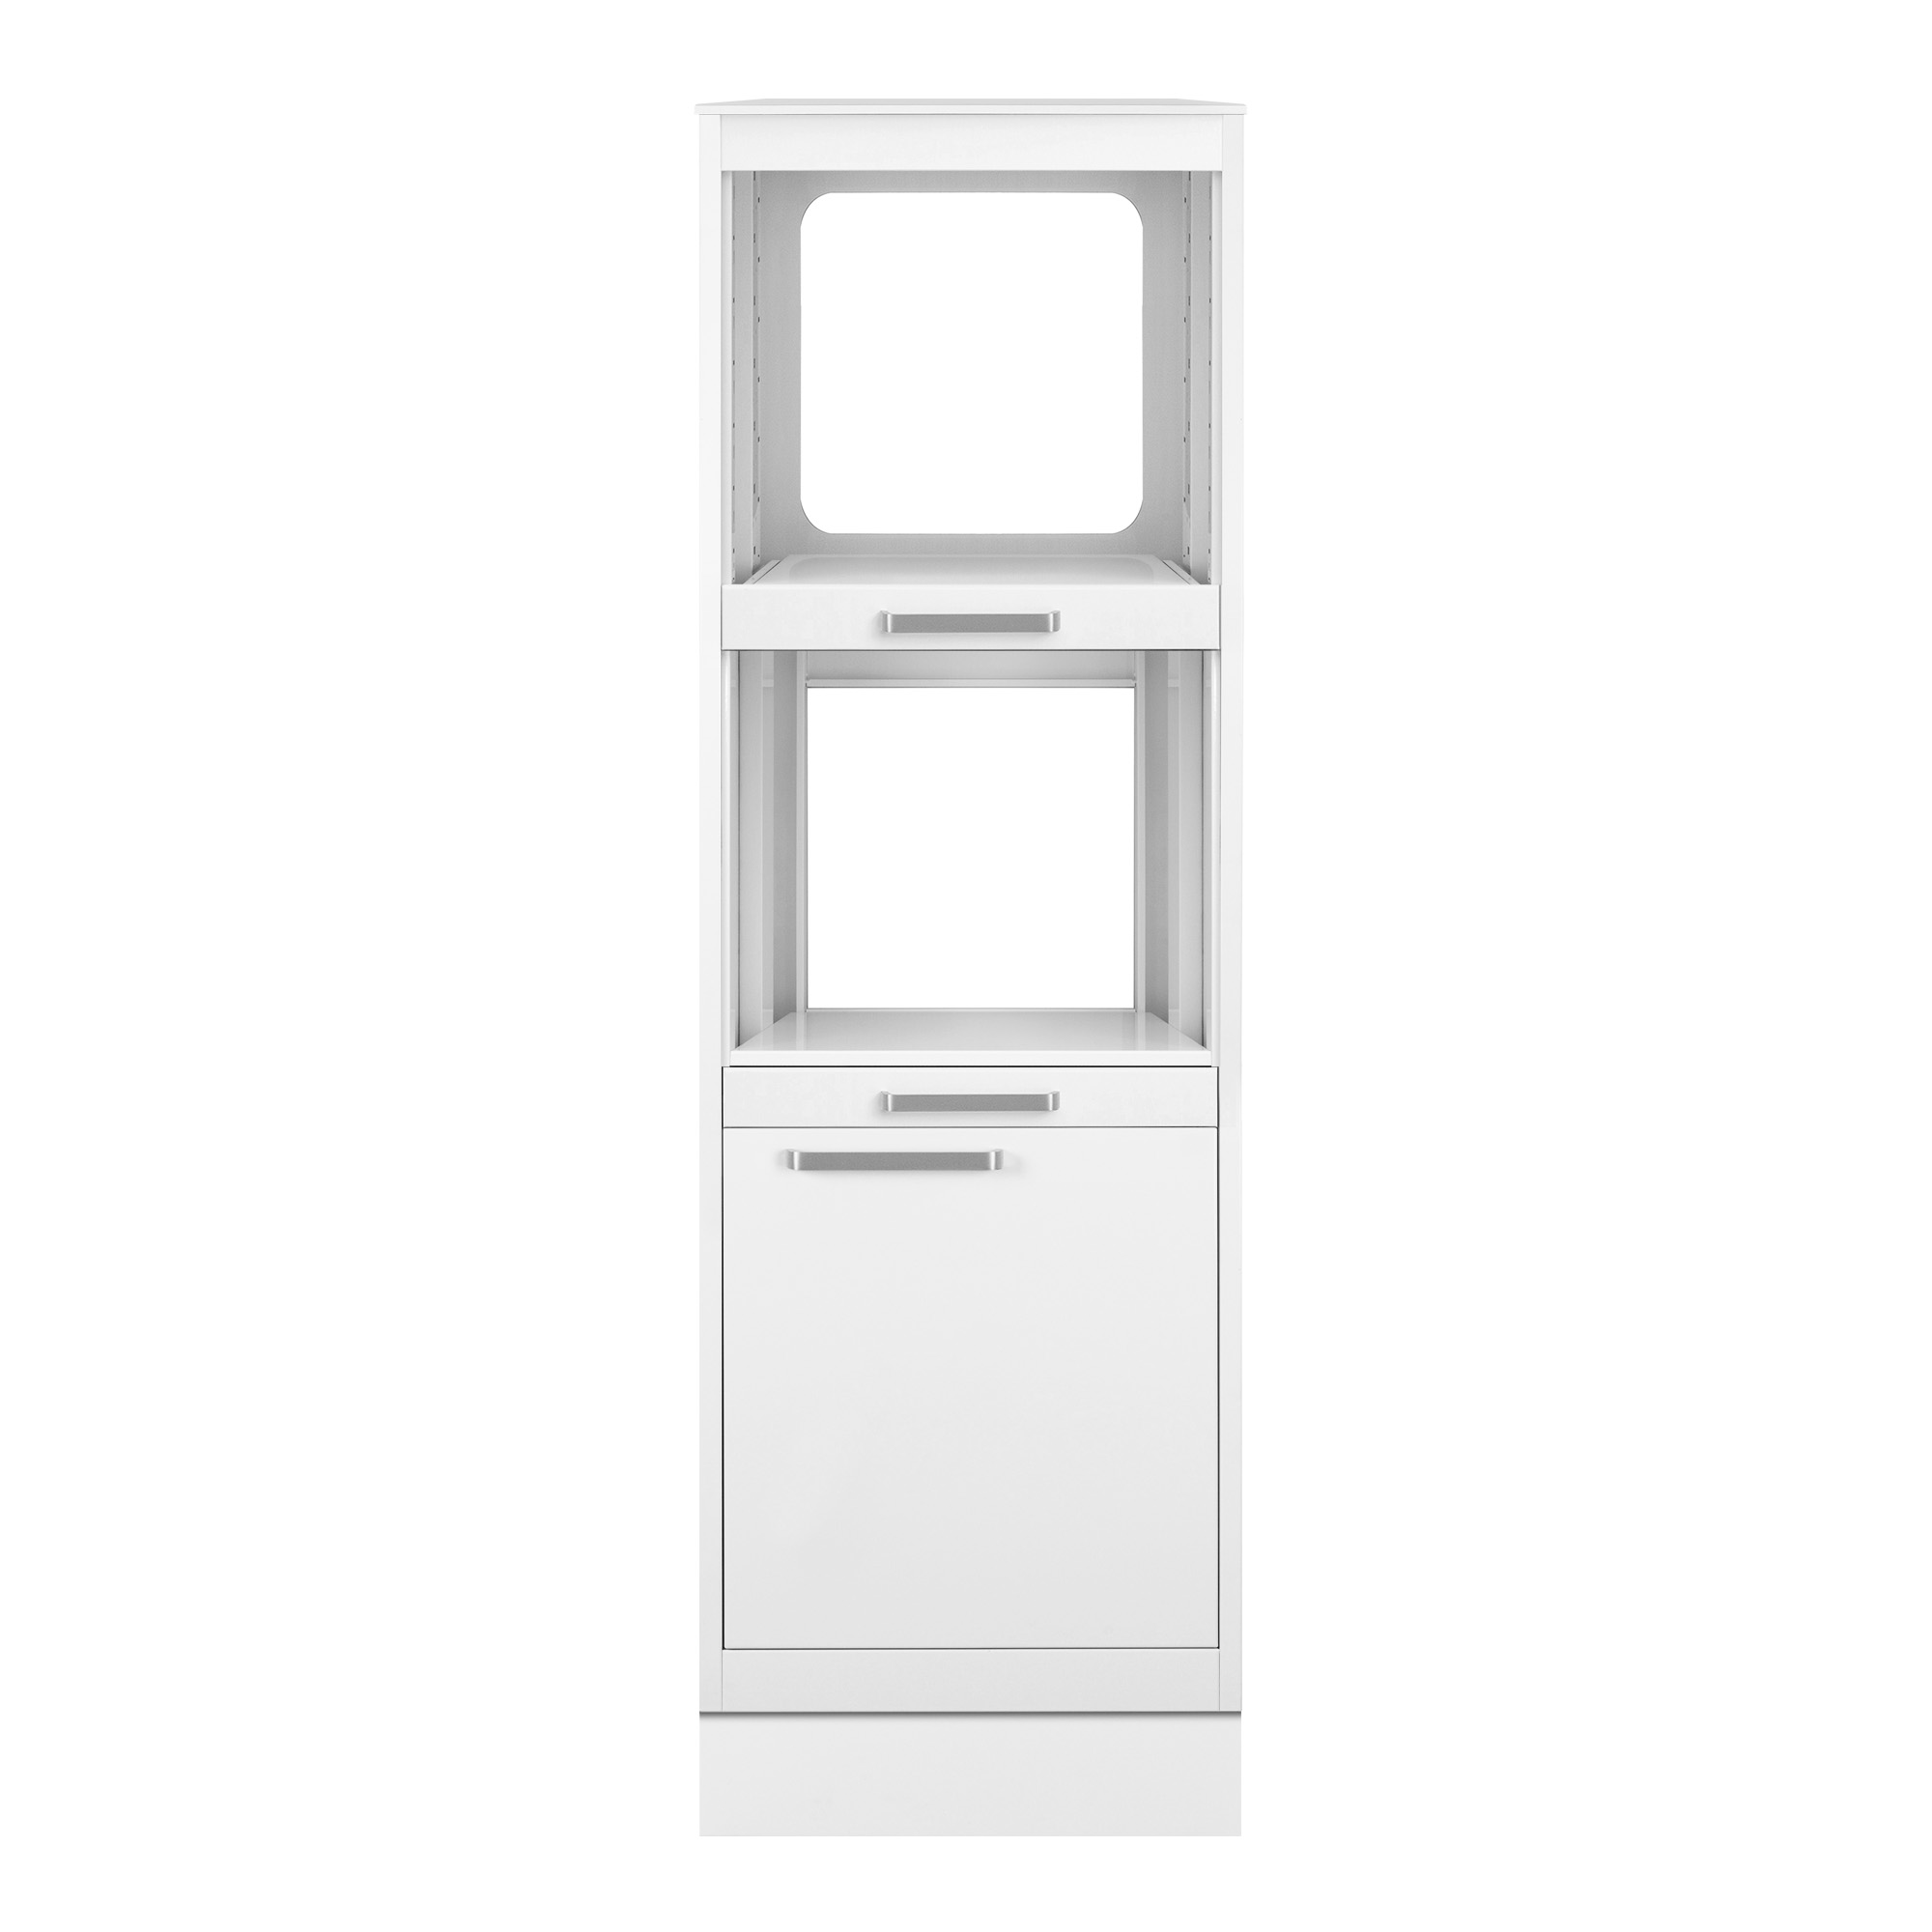 3-compartment tall unit with door and plinth